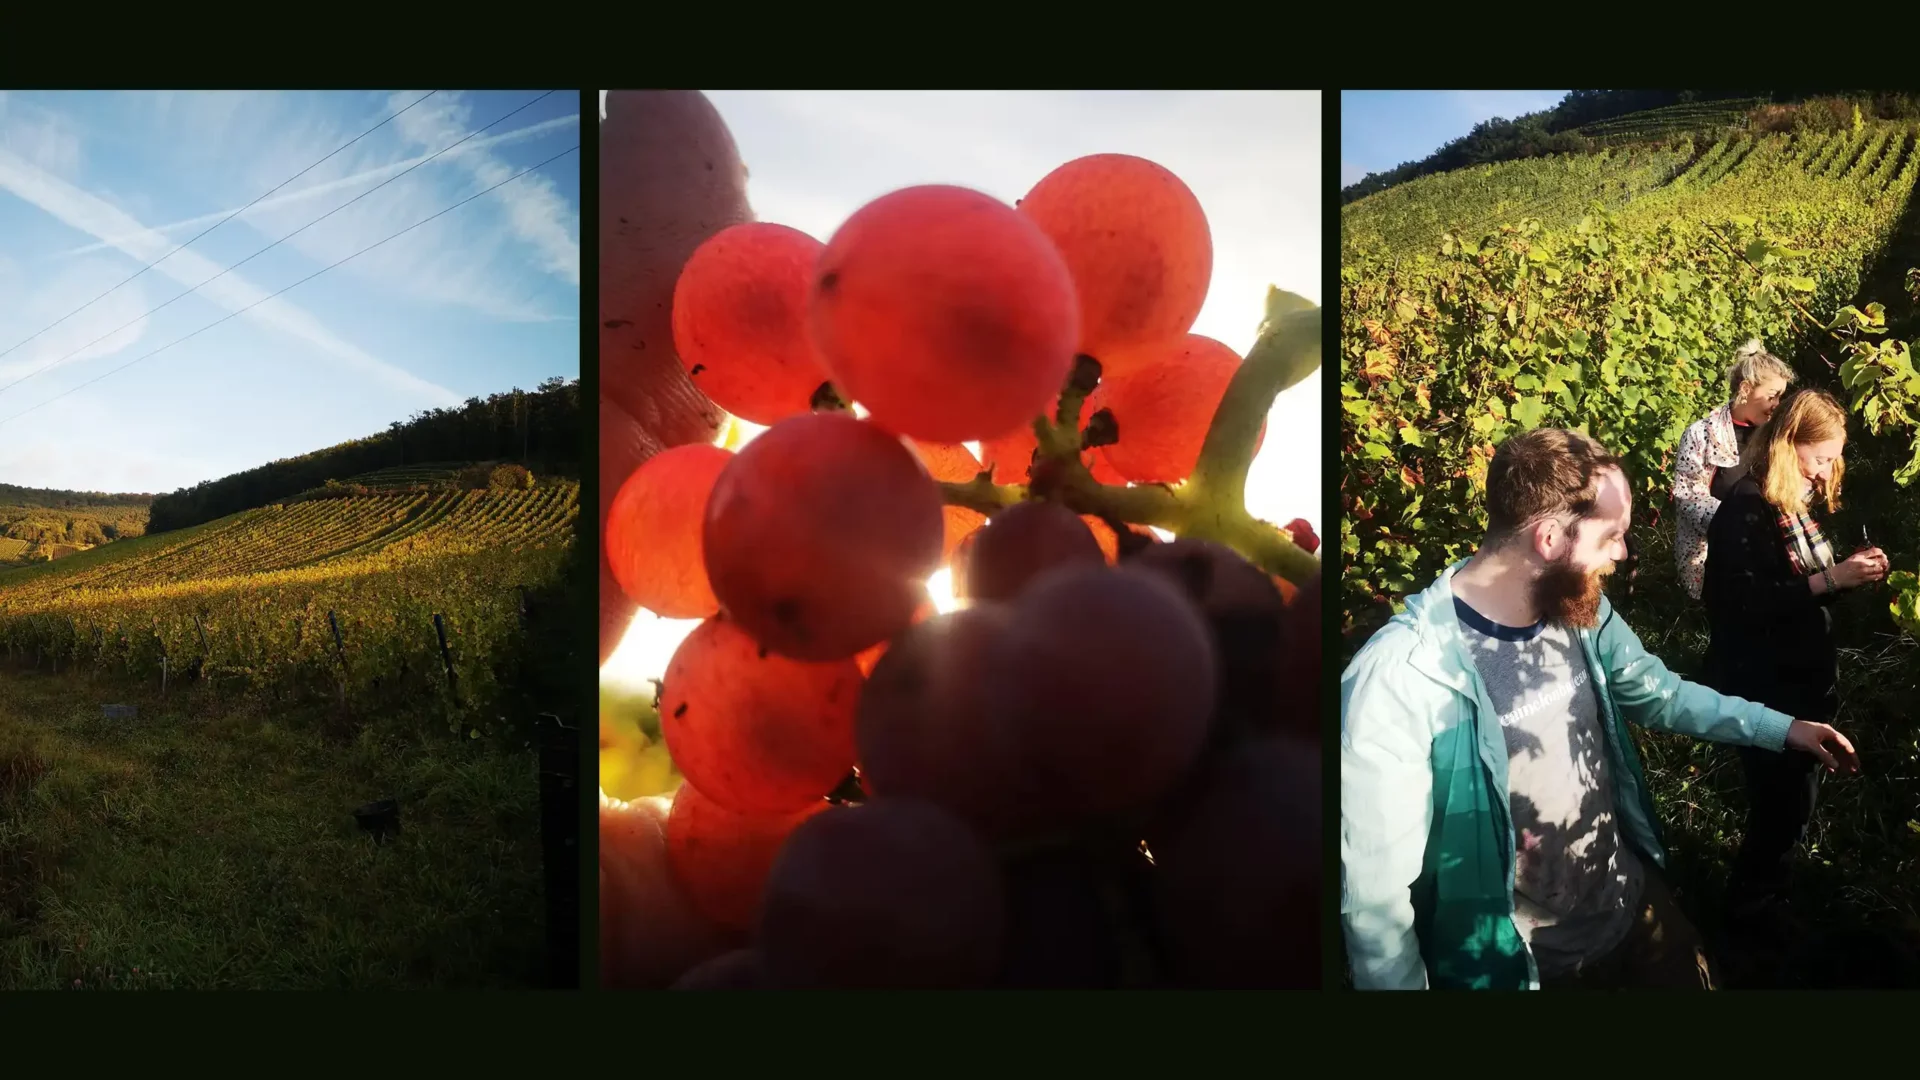 Three photos of the grapes being harvested for wine production